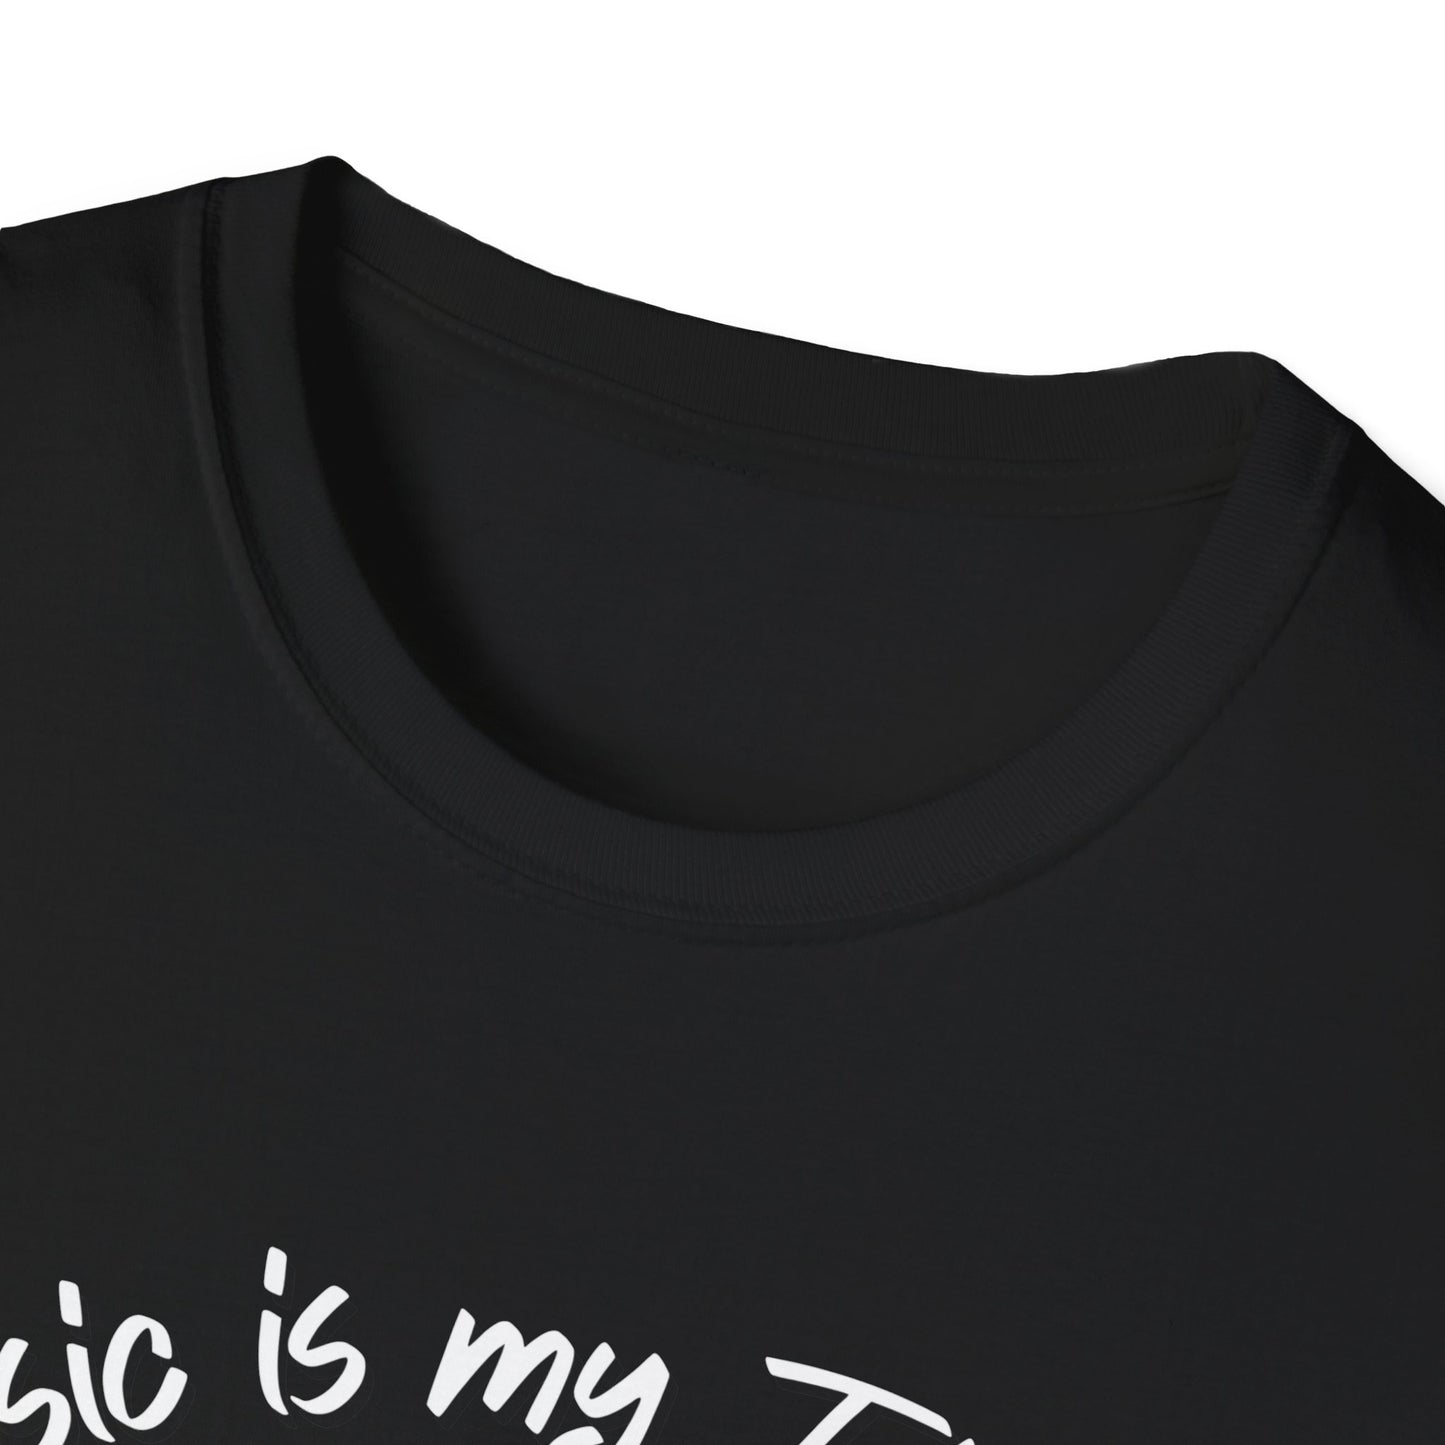 Short sleeve t-shirt with piano design (Music is my therapy)